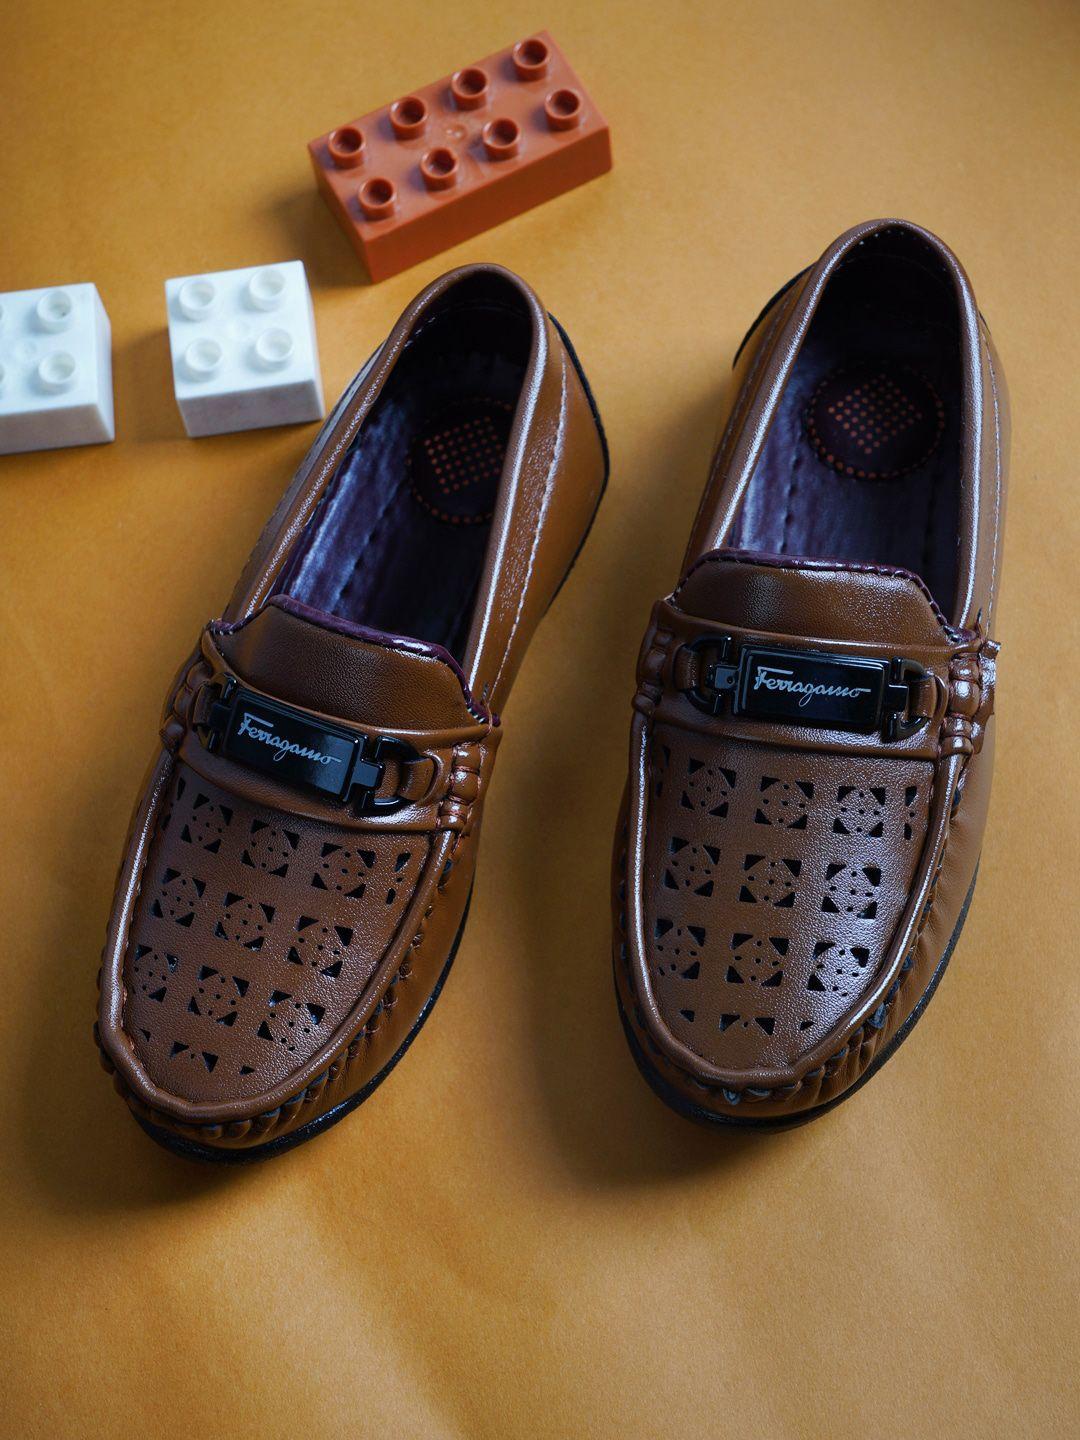 style-shoes-boys-textured-loafers